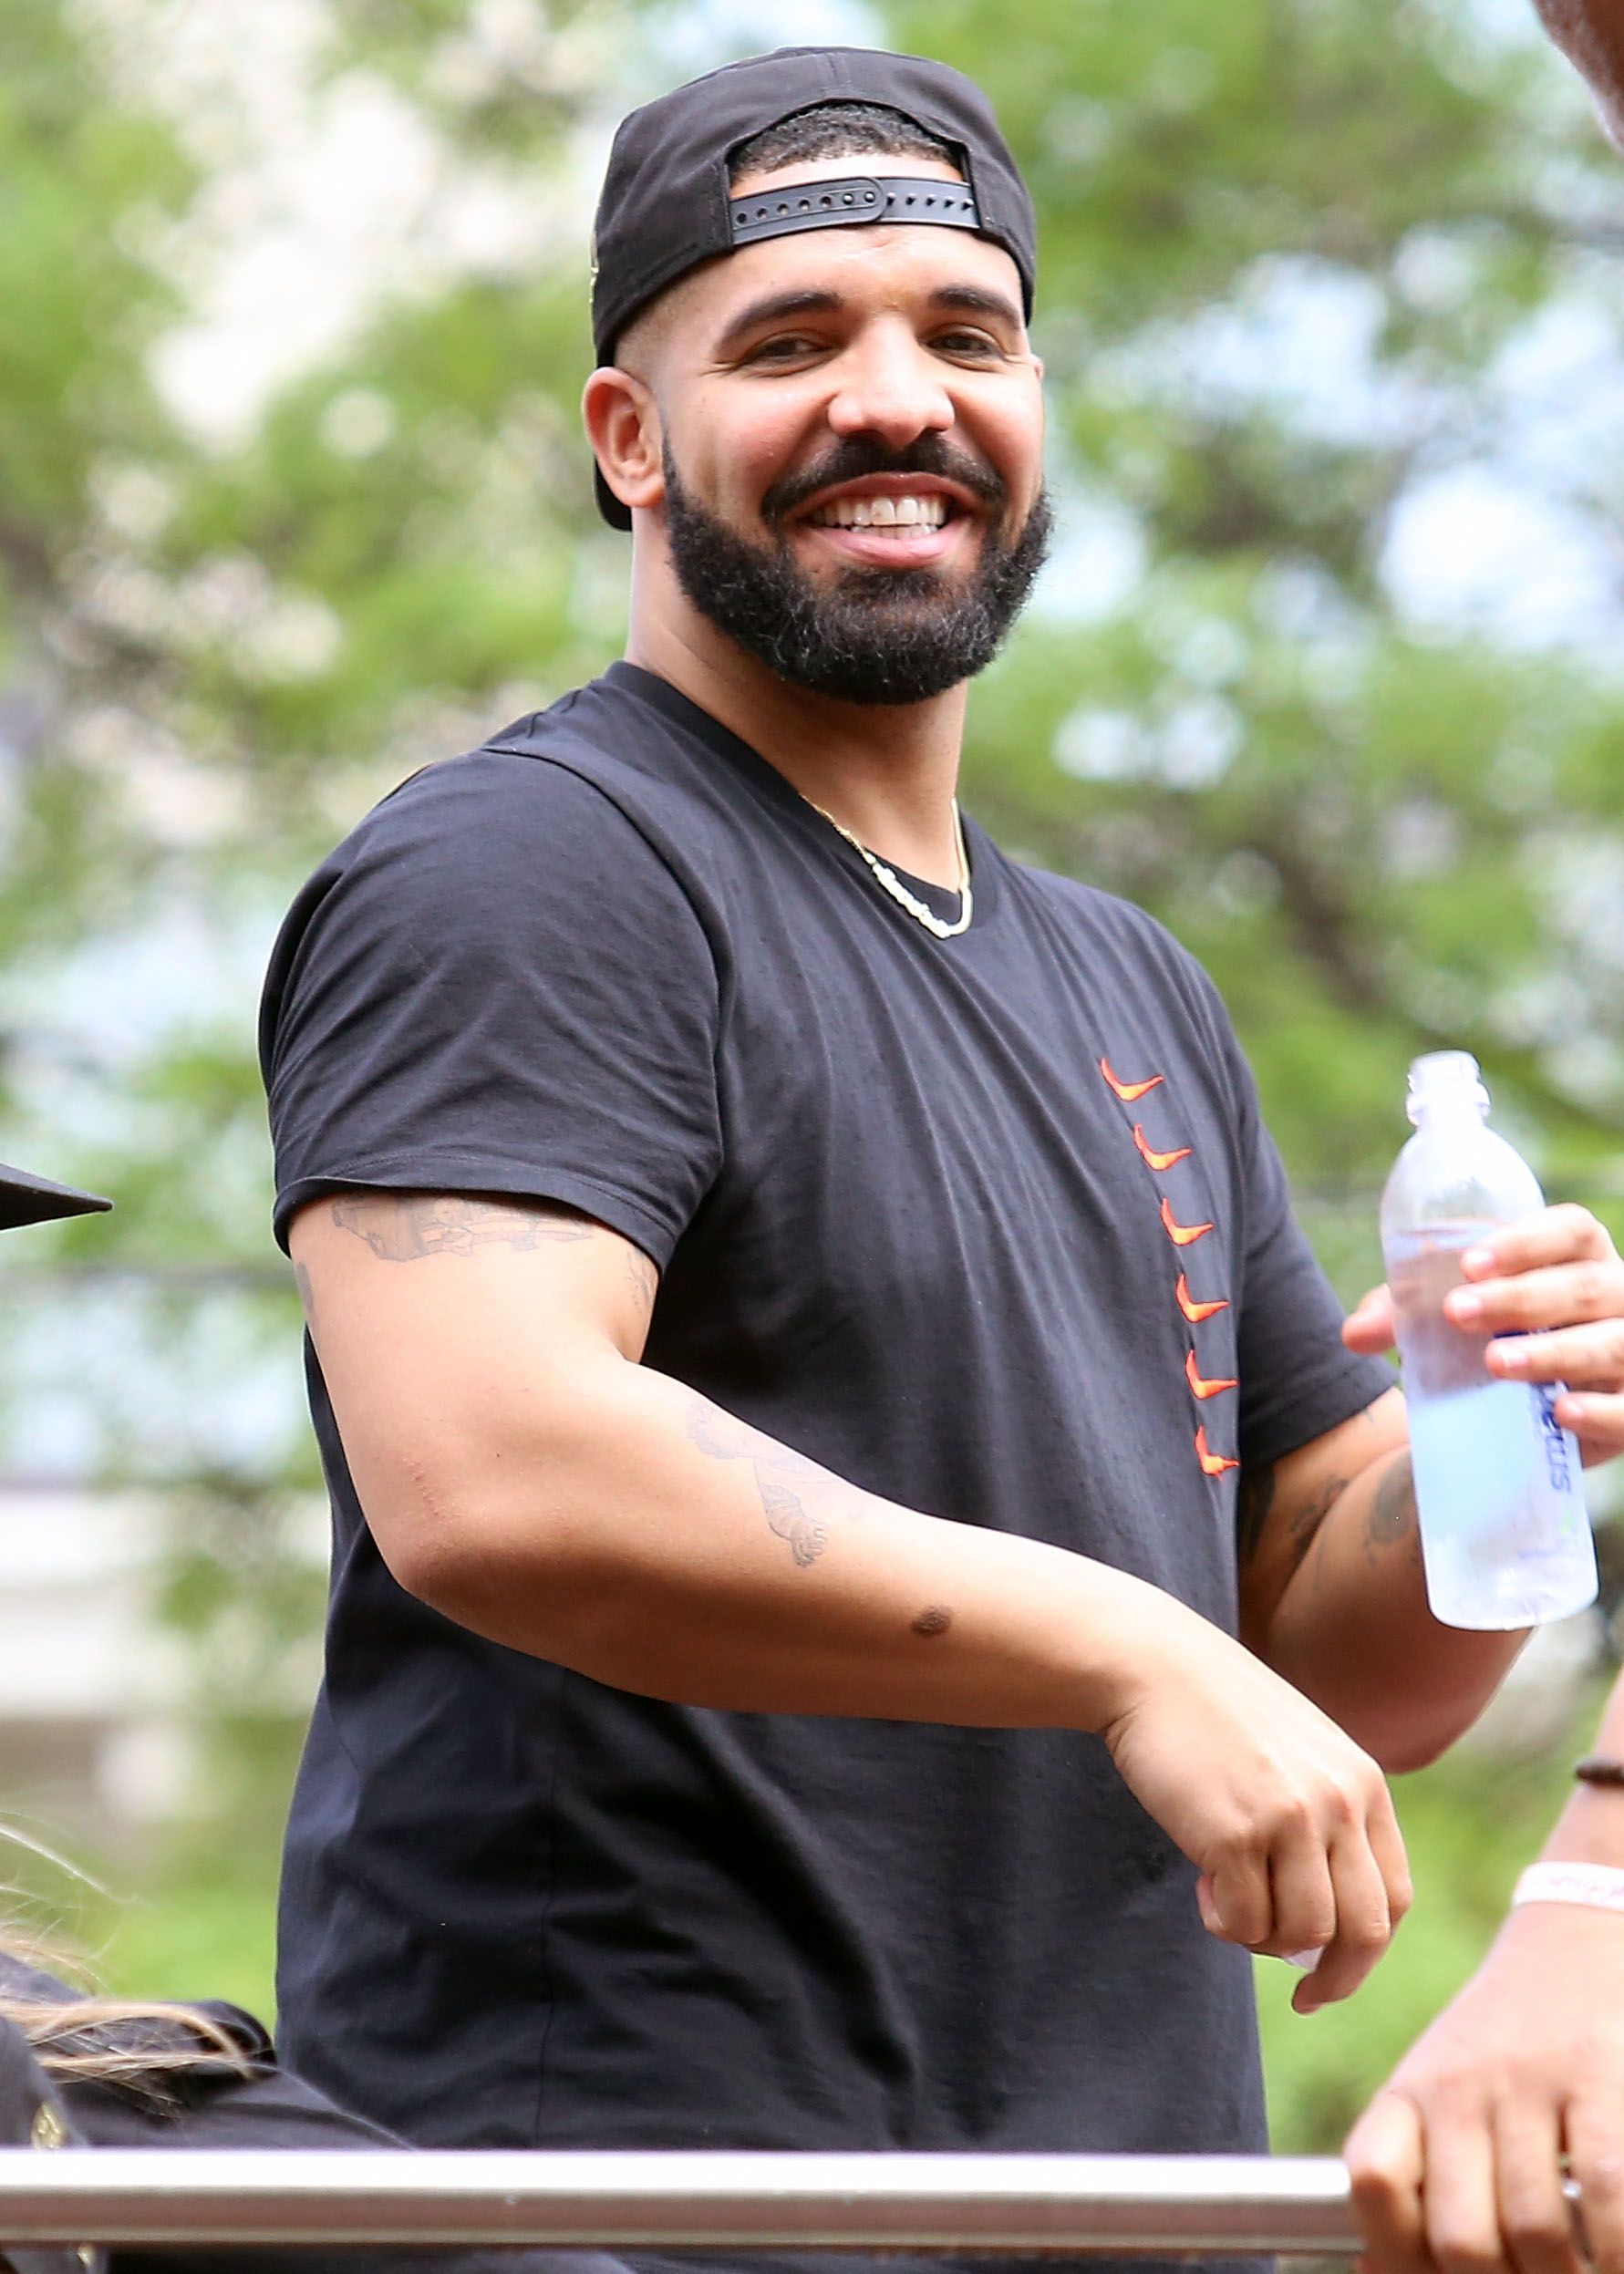 Drake Disrespects The Beatles With an Abbey Road Tattoo